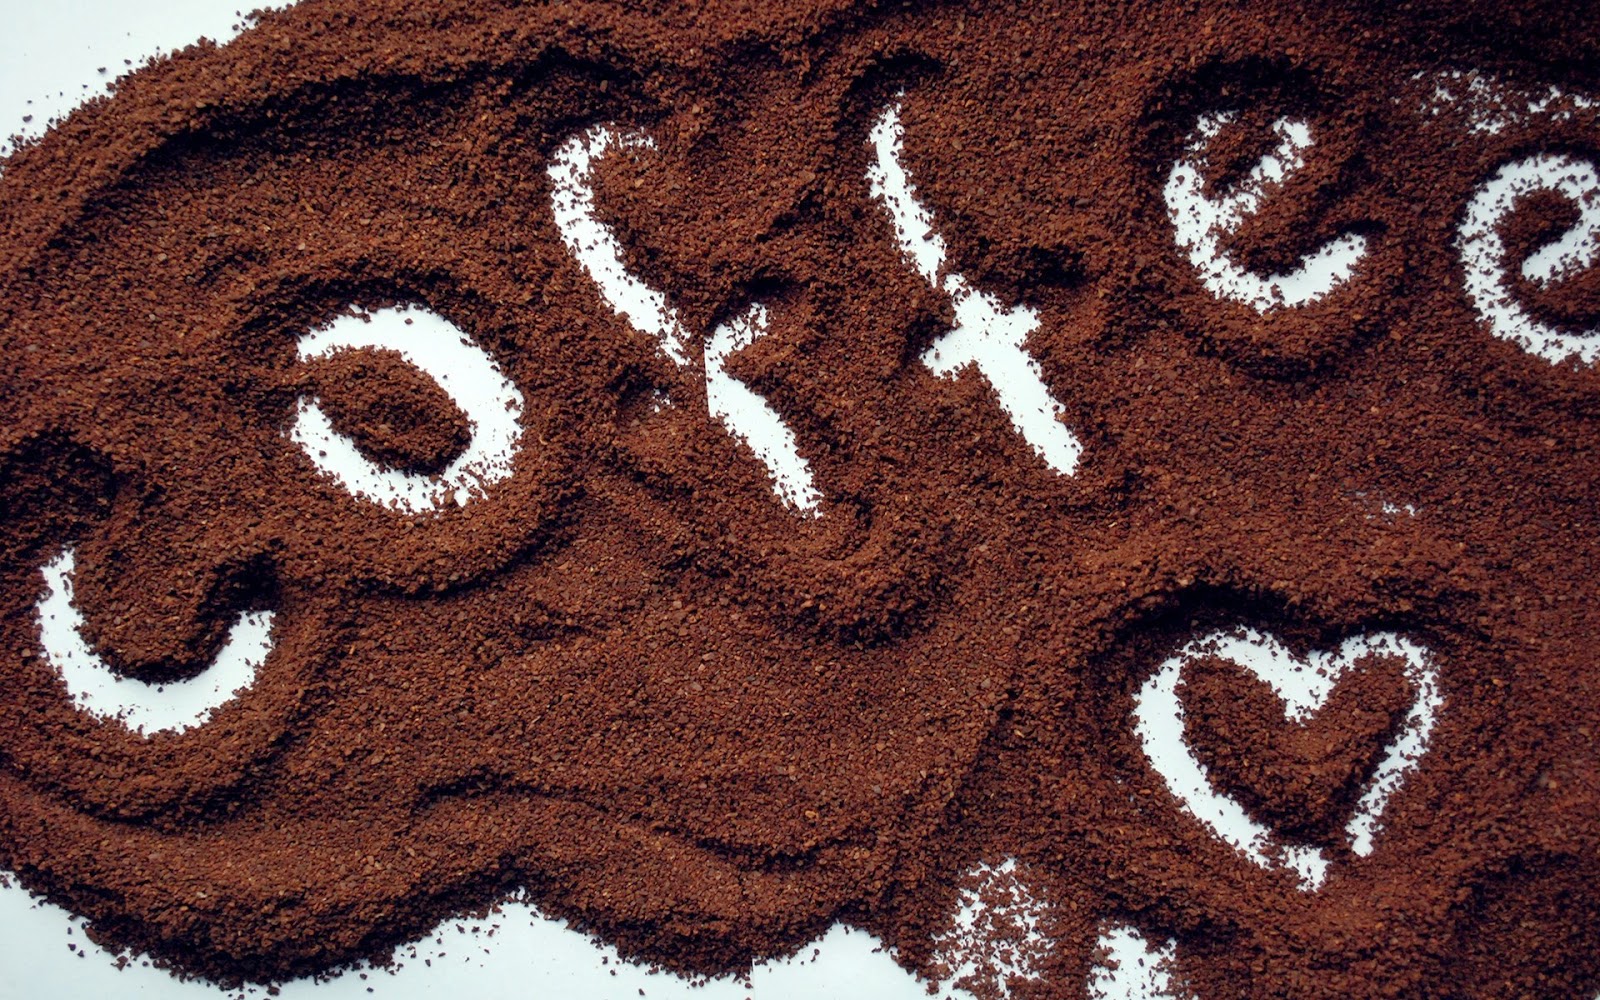 Check Out The 12 Ways to Recycle & Reuse Your Coffee Grounds! Home Hacks Reuse & Recycle   